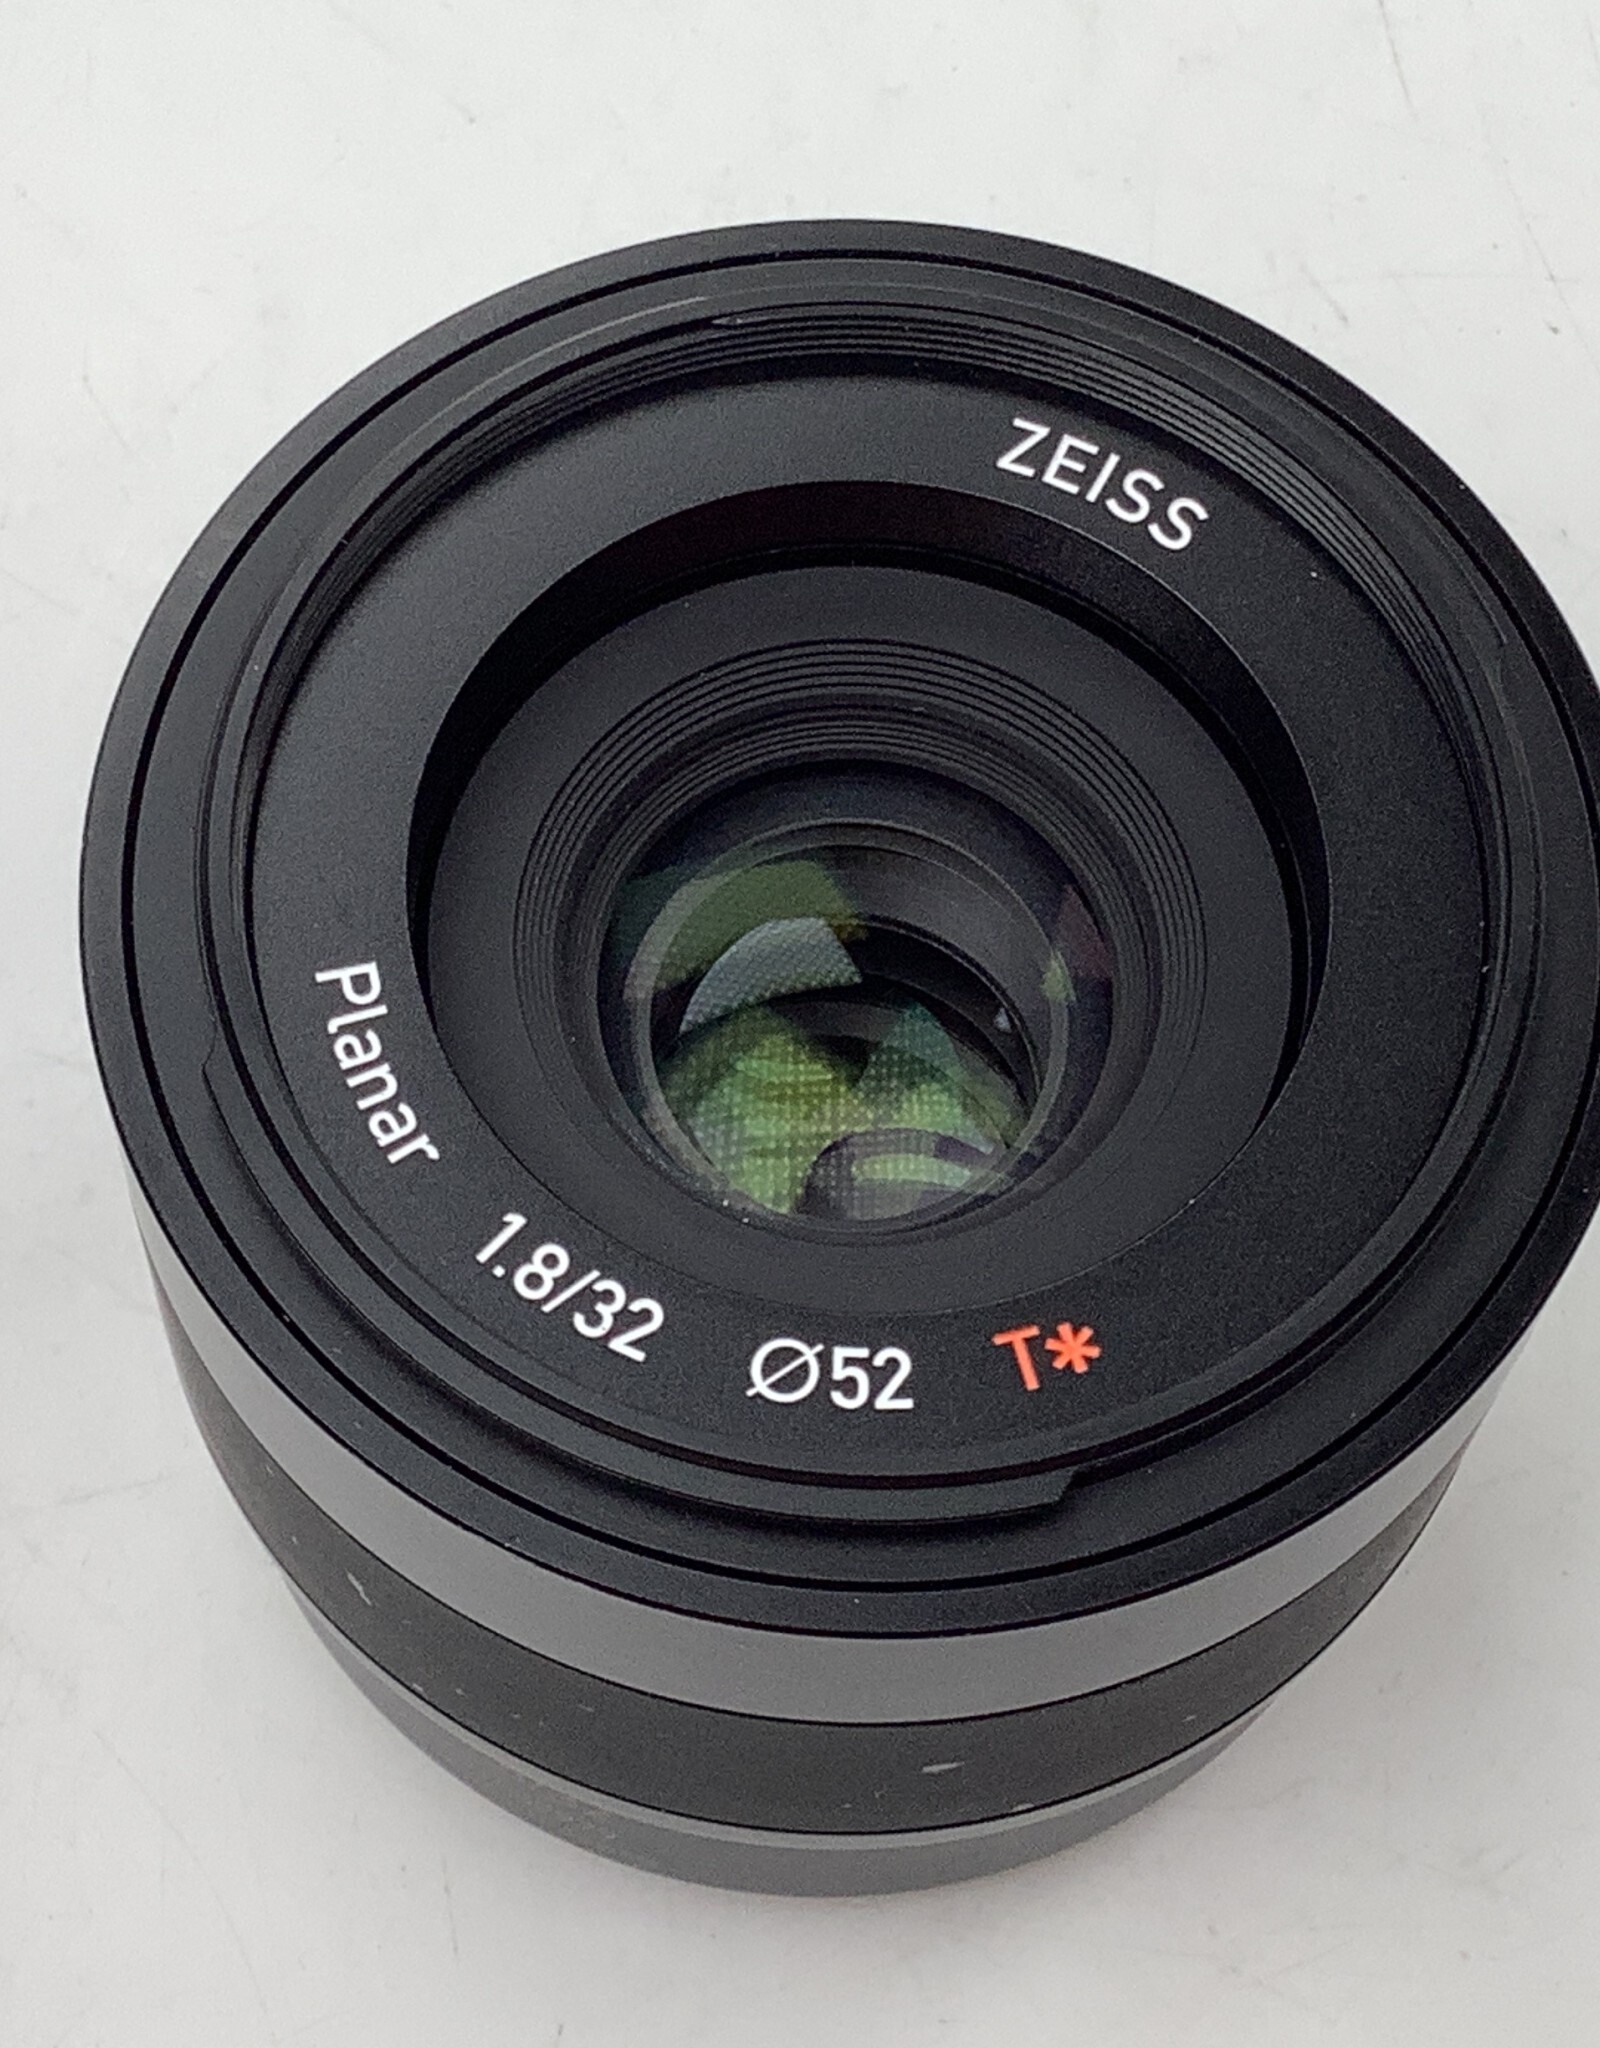 NIKON Zeiss Planar 32mm f1.8 T* Lens for Sony E Used Good